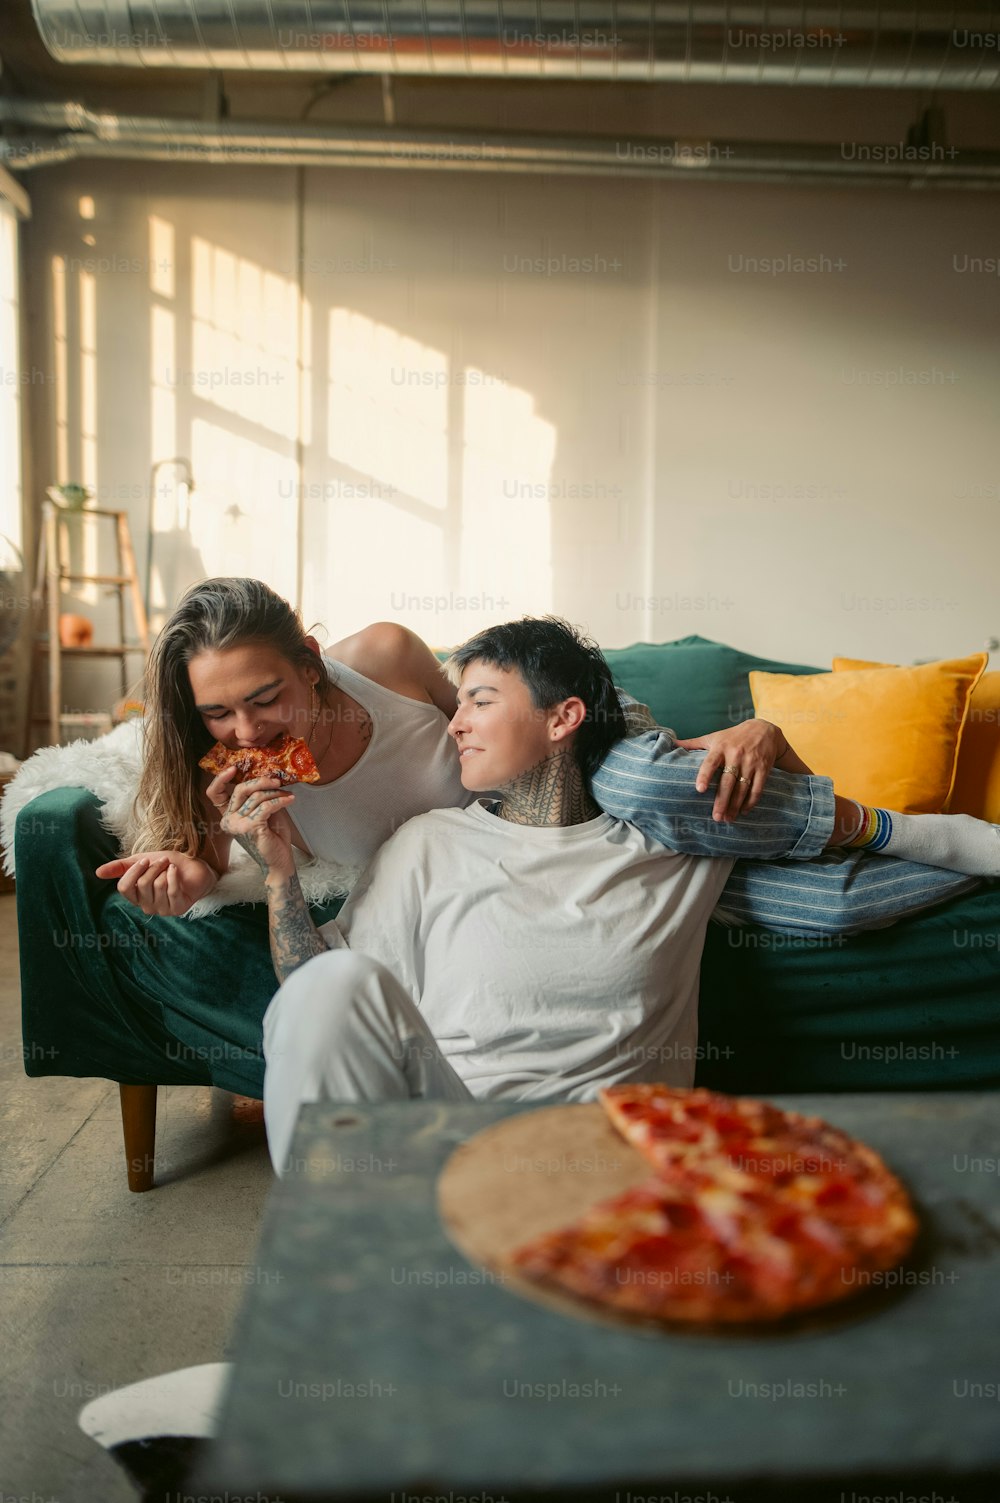 a man and a woman sitting on a couch eating pizza